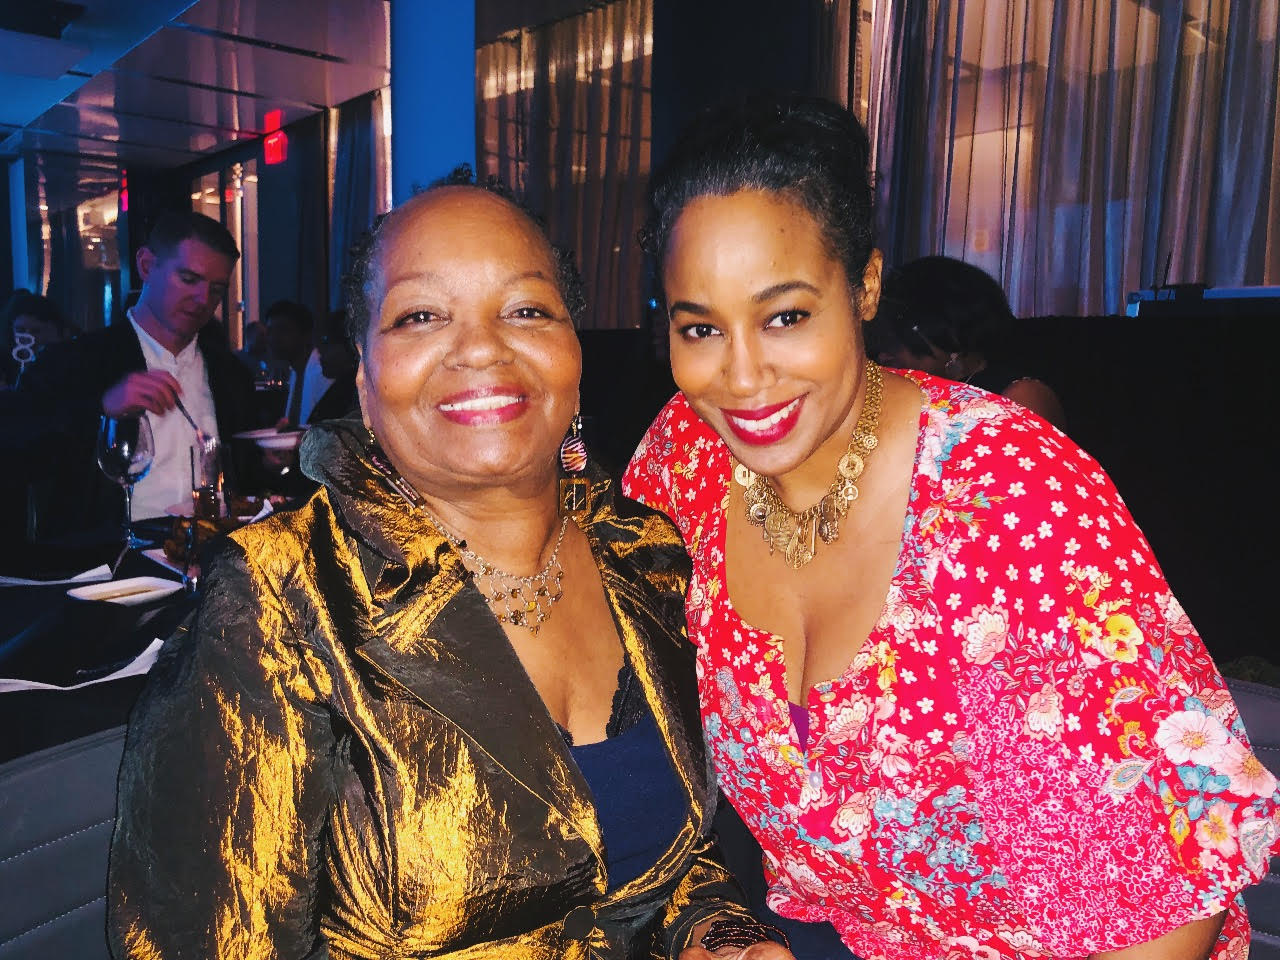 Filmmaker Sabrina Schmidt Gordon (right), a Black woman wearing a pint and red floral print shirt, with Mable Haddock, a Black woman wearing a gold jacket. Courtesy of Sabrina Schmidt Gordon.